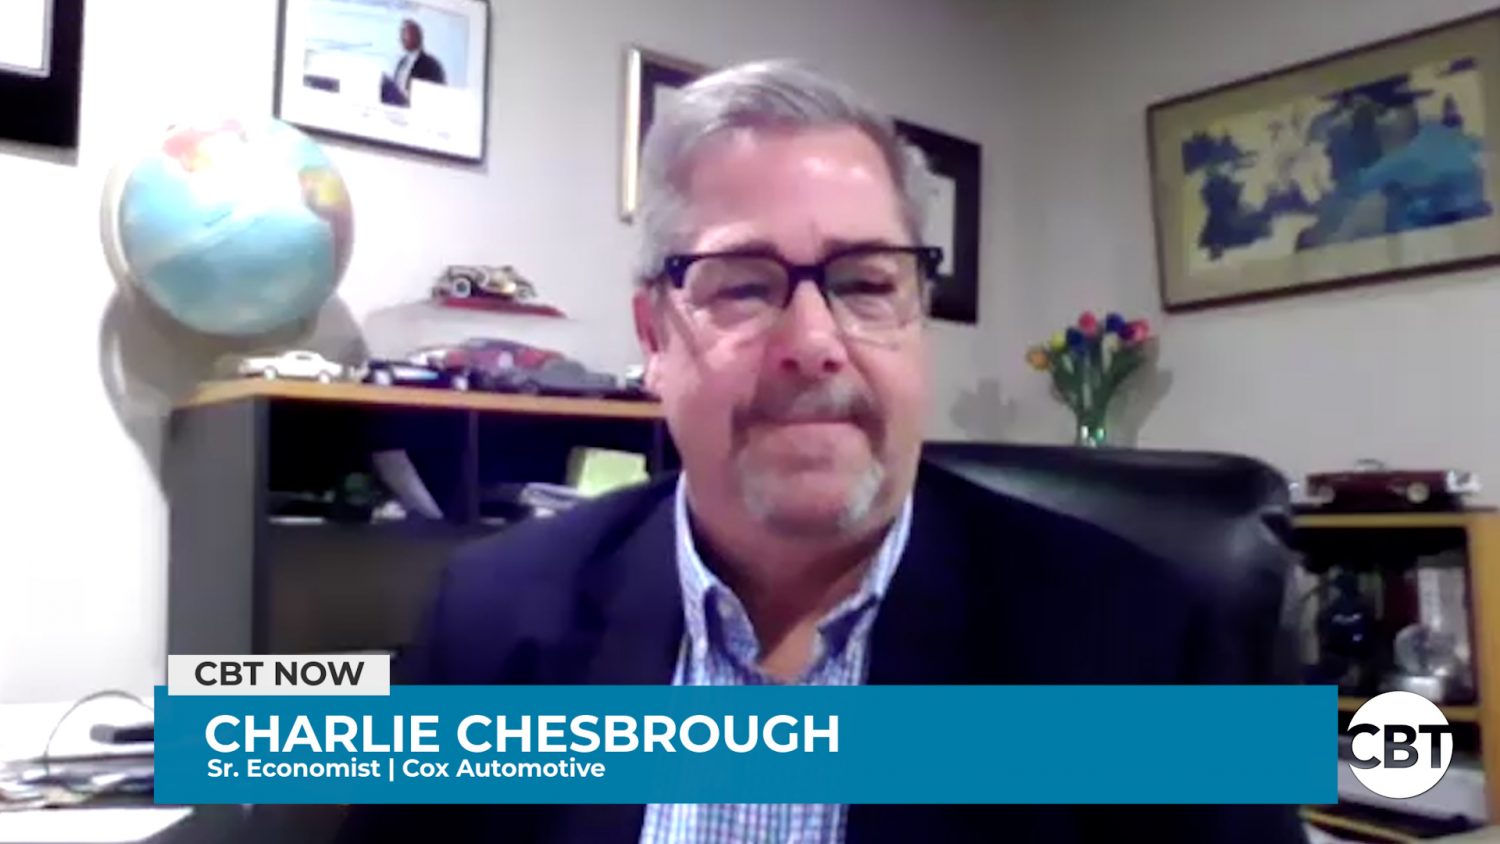 In today's episode of CBT Now, we explore data and learn what may lie ahead. Charlie Chesbrough, Cox Automotive's Senior Economist, joins us.